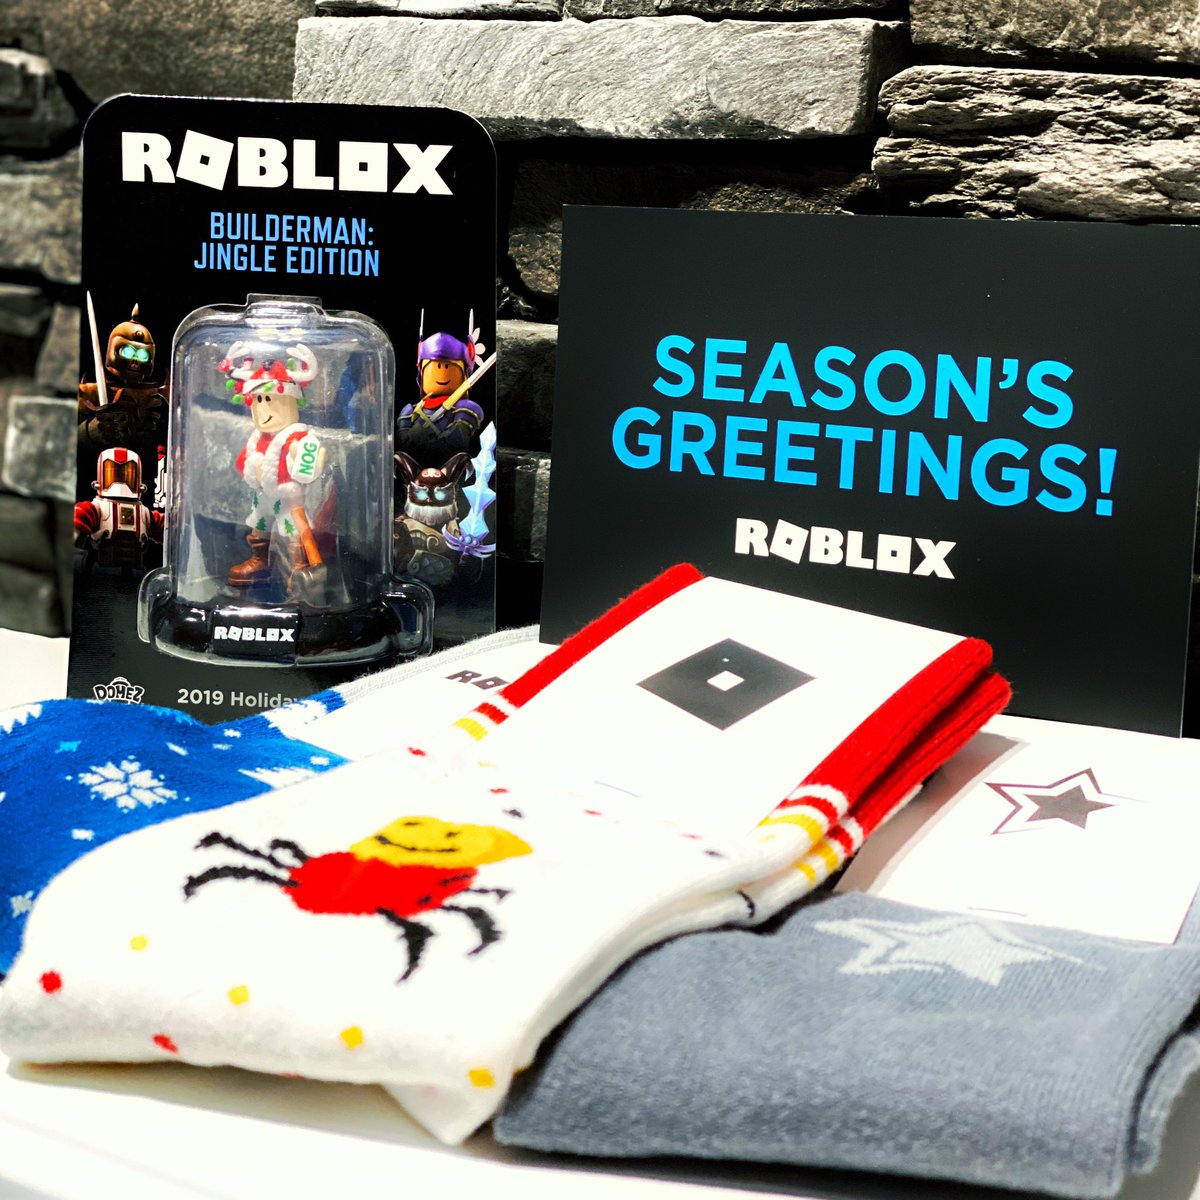 Itsfunneh On Twitter Awesome Gift From Roblox Thanks Roblox